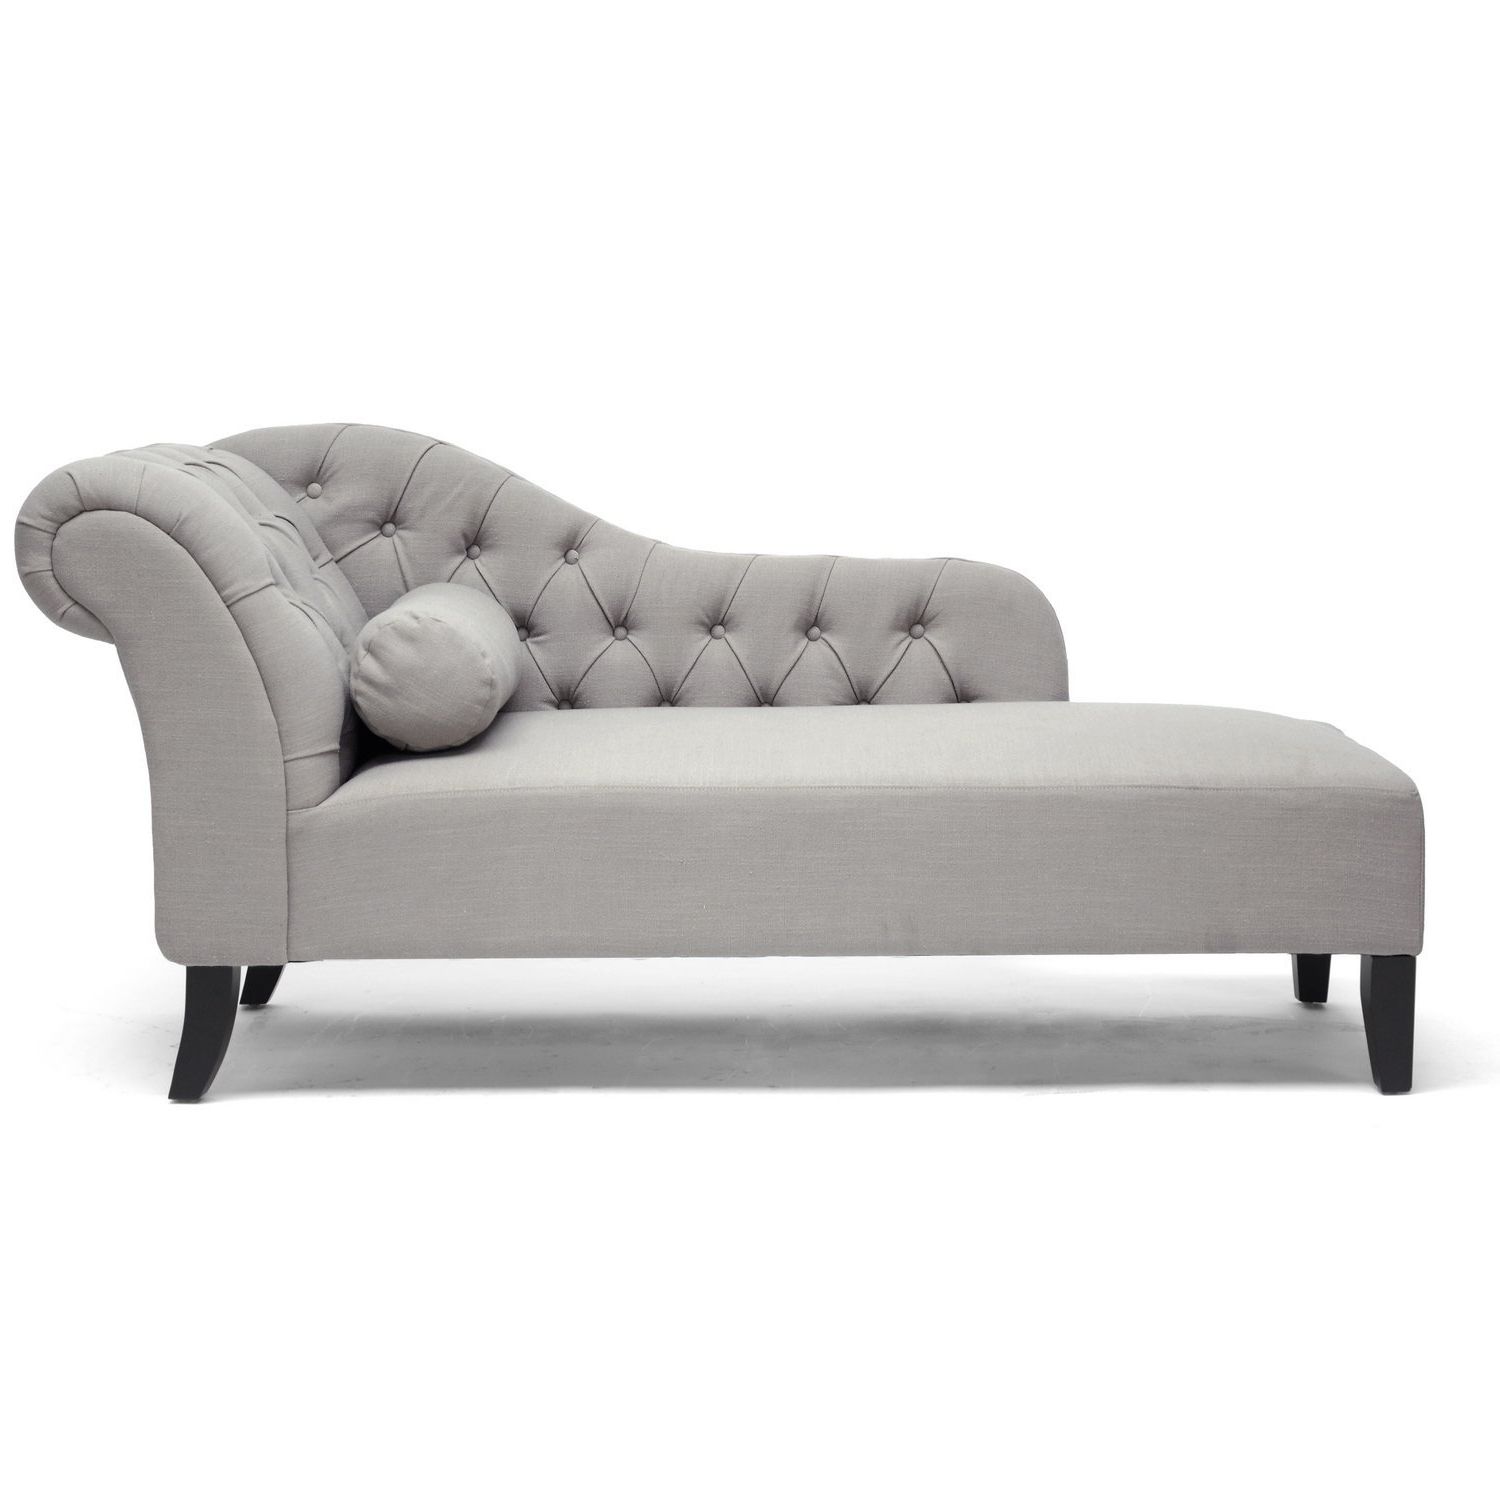 Well Liked Amazon: Baxton Studio Aphrodite Tufted Putty Linen Modern With Regard To Modern Chaise Lounges (View 13 of 15)